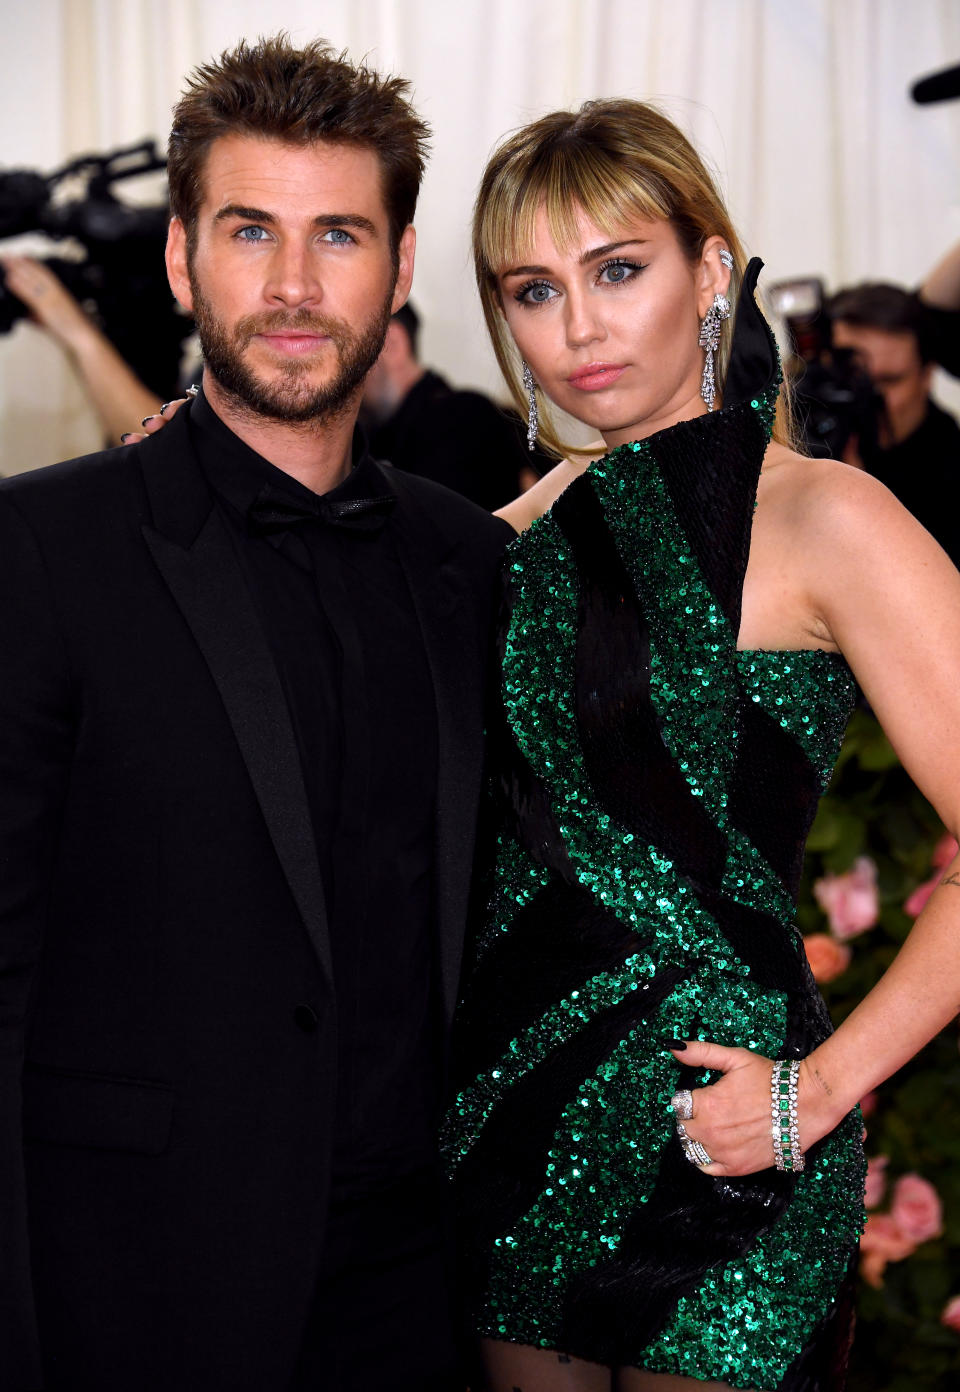 Miley Cyrus and Liam Hemsworth not smiling